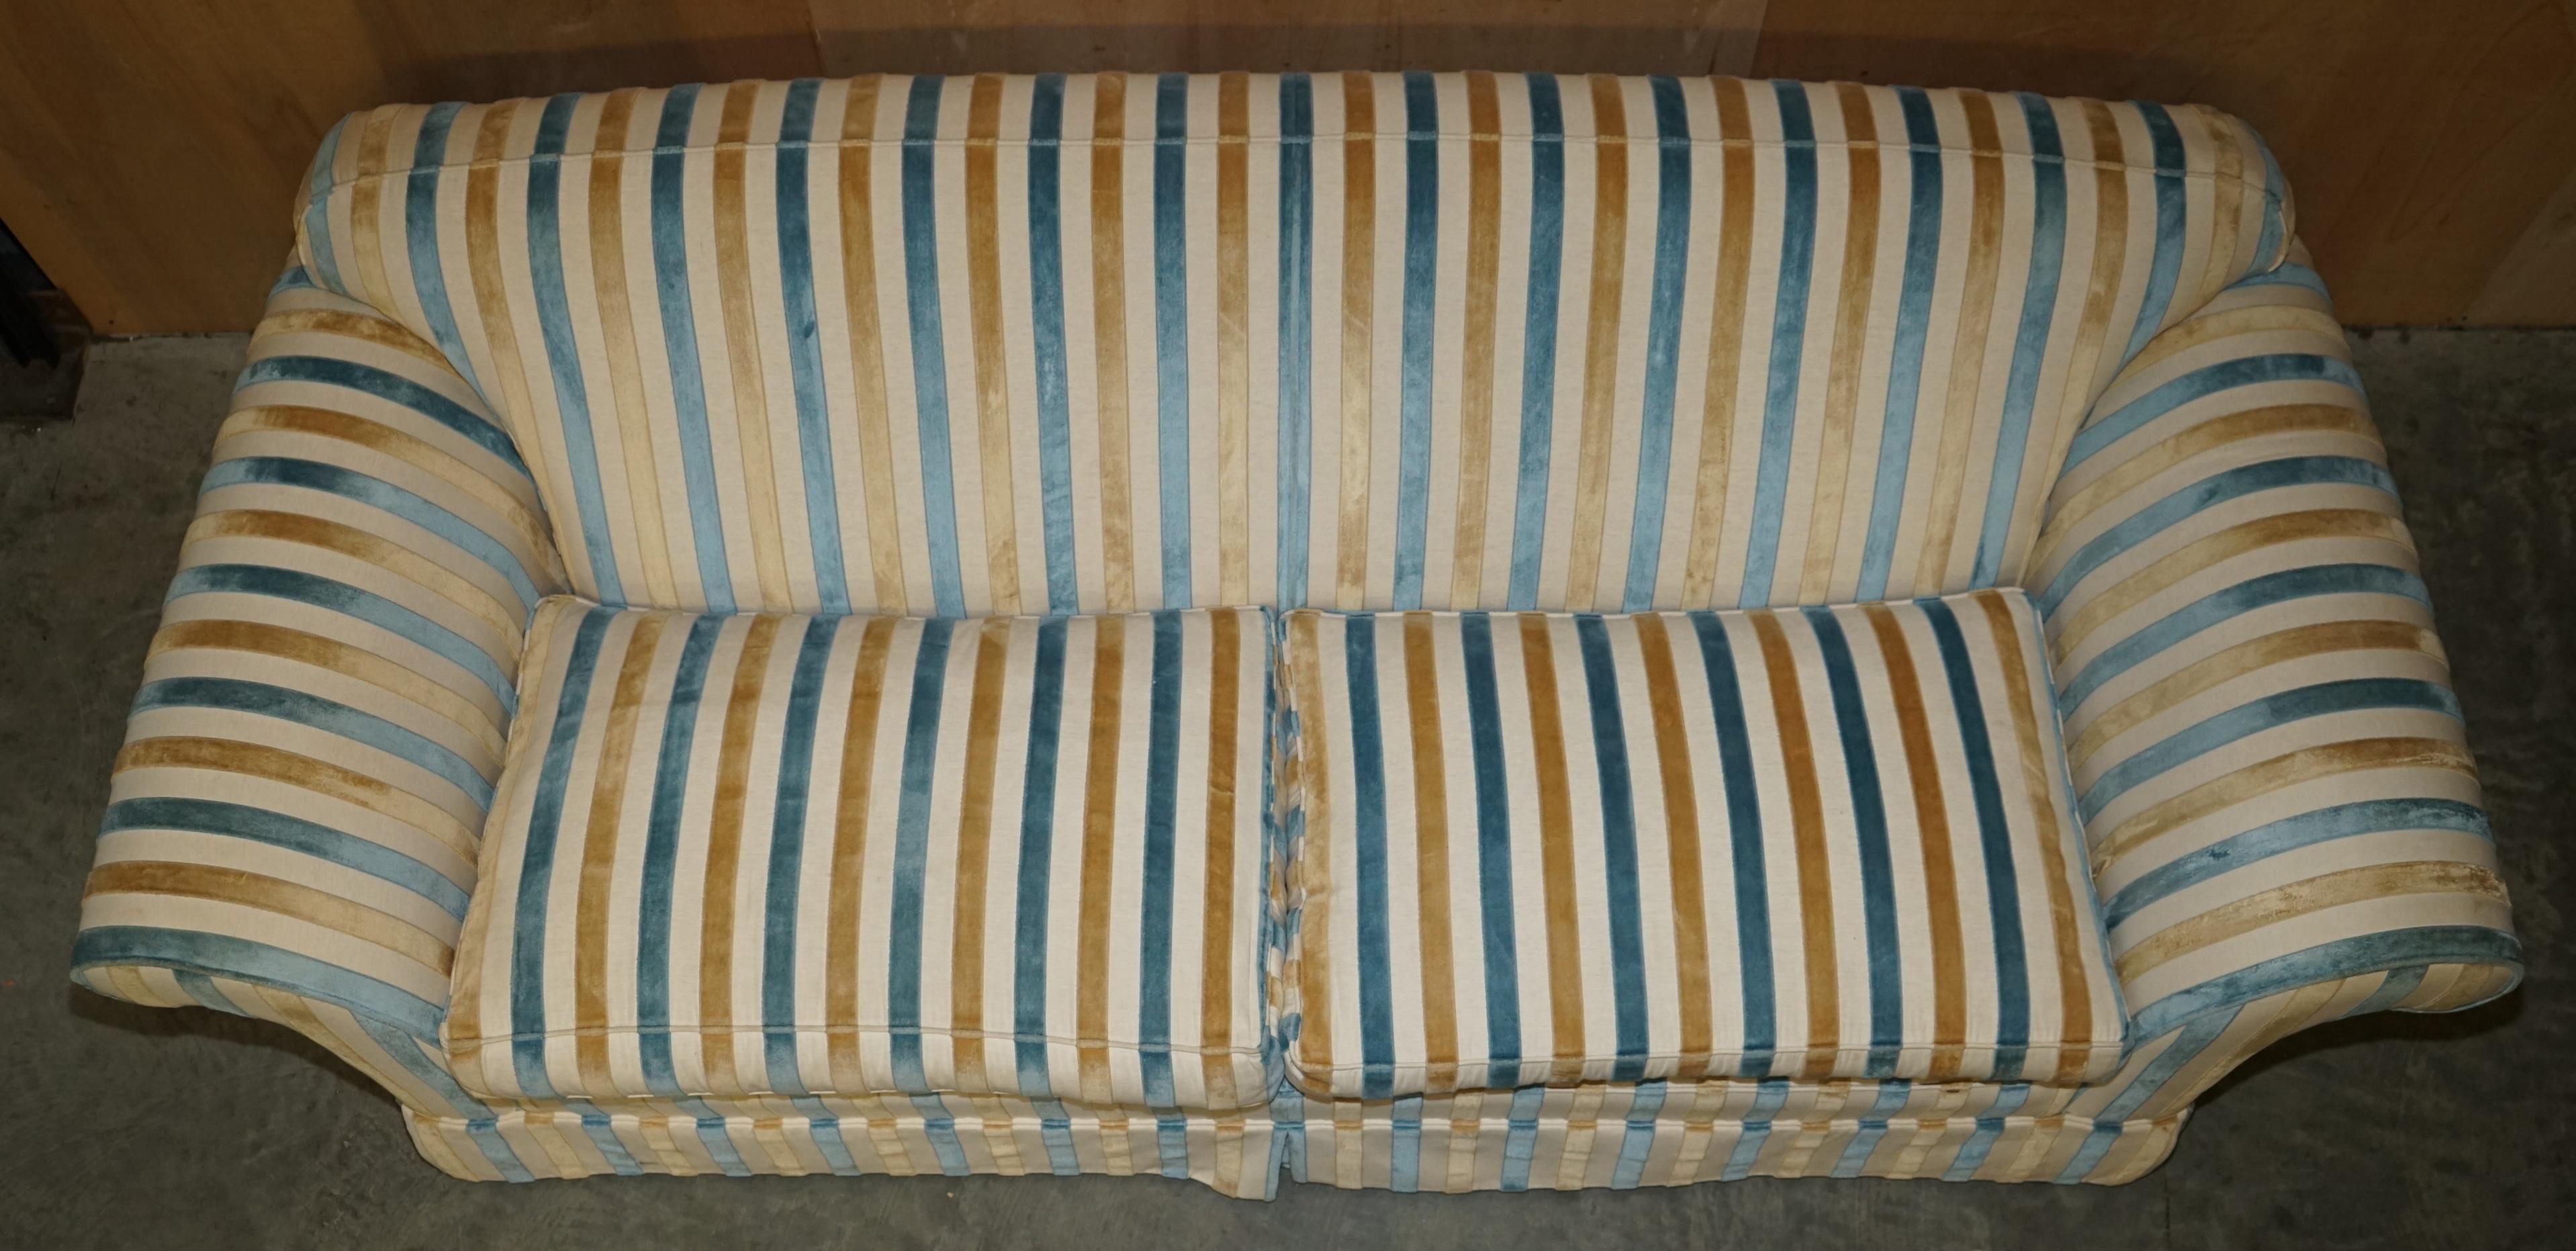 1 OF 2 STUNNING MULBERRY HOME DESIGNER CONTEMPORARY STRIPED THREE SEATER SOFAs For Sale 3